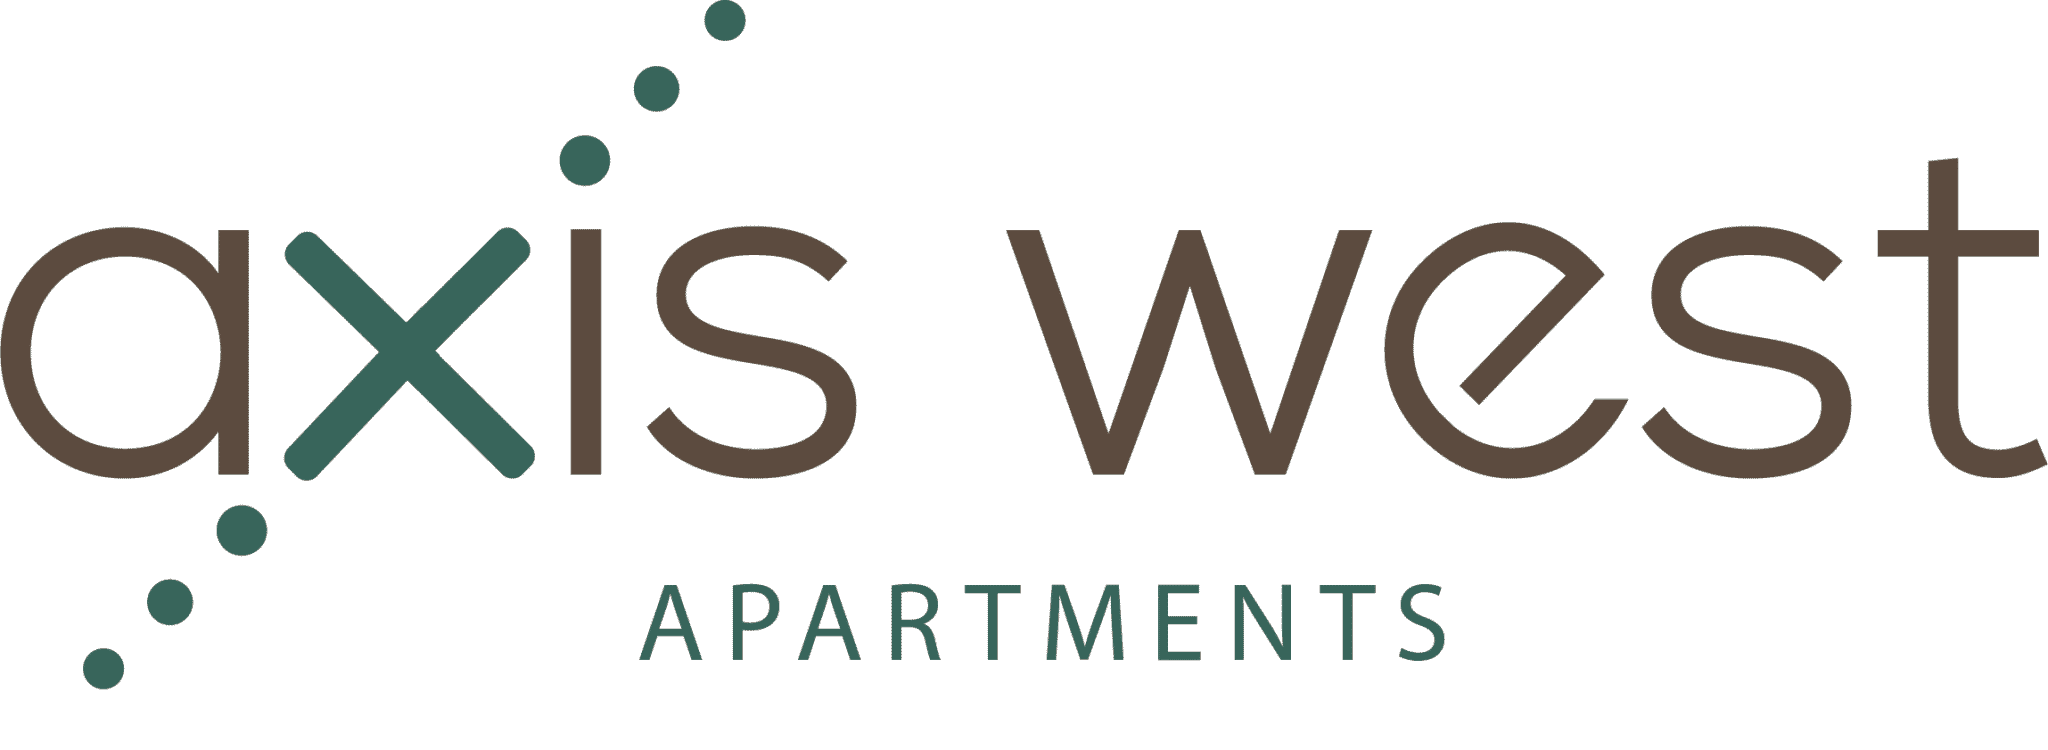 Axis West Apartments Logo